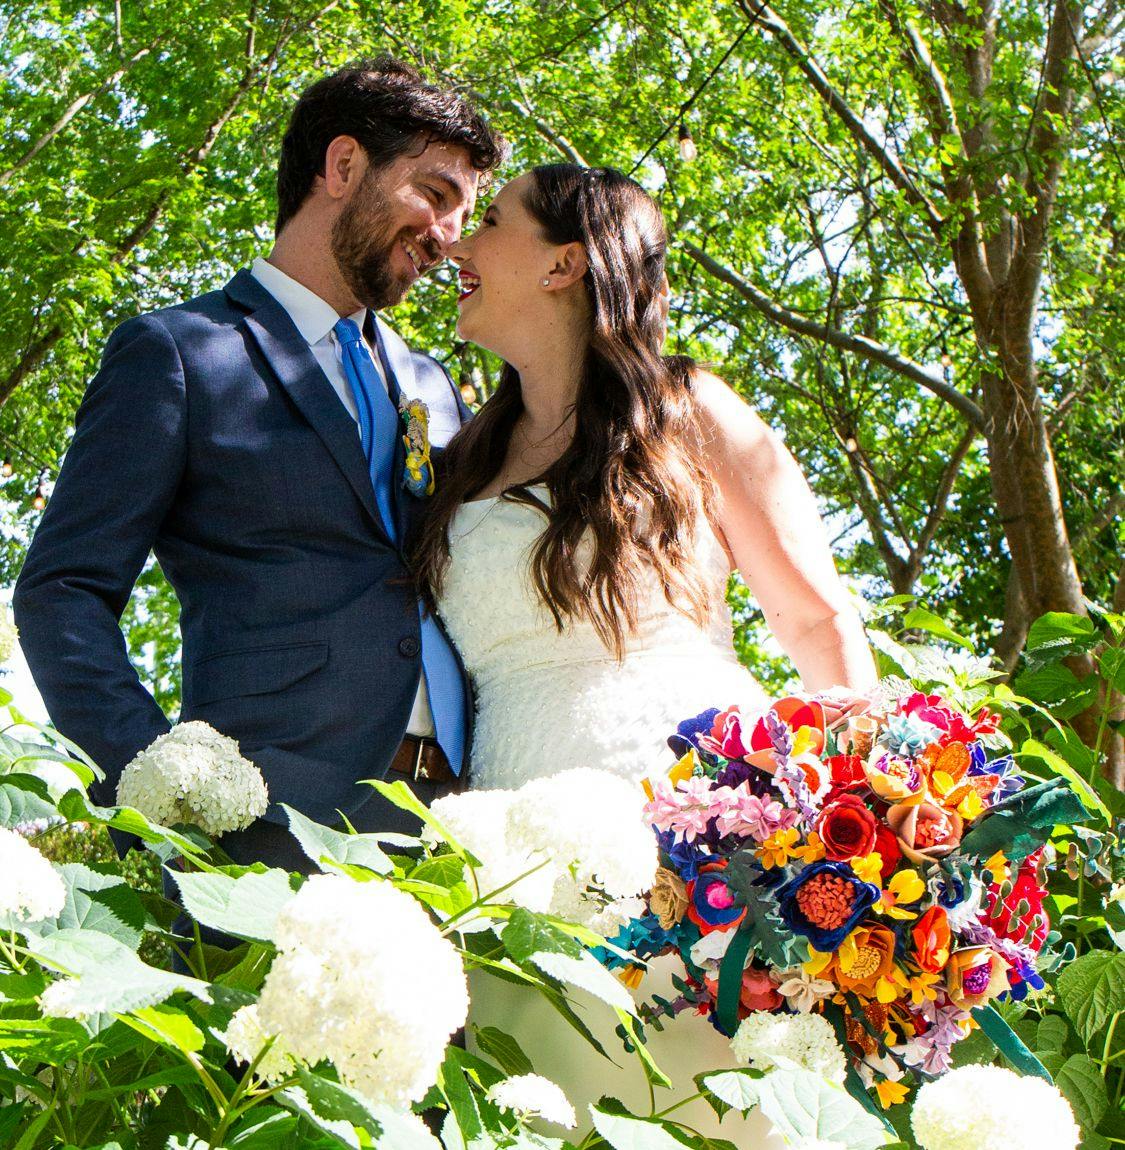 Lauren, holding her fabric bouquet, and her husband Jake, looking lovingly at each other in the sunshine.